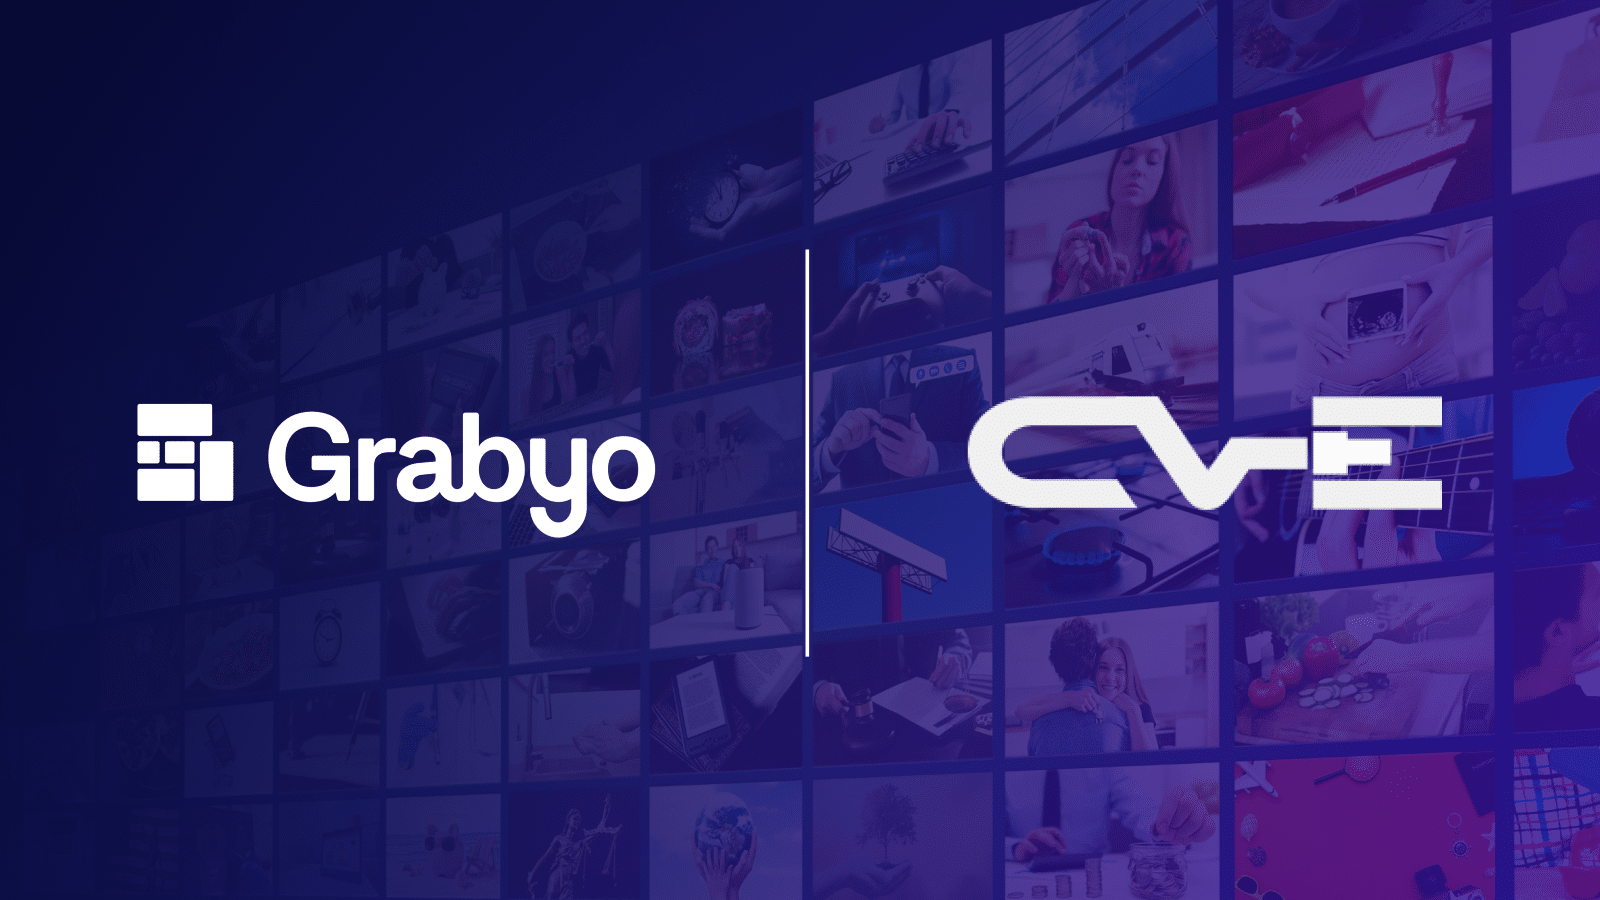 Communication Video Engineering (CVE) partners with Grabyo to bring integrated cloud video production to Italy